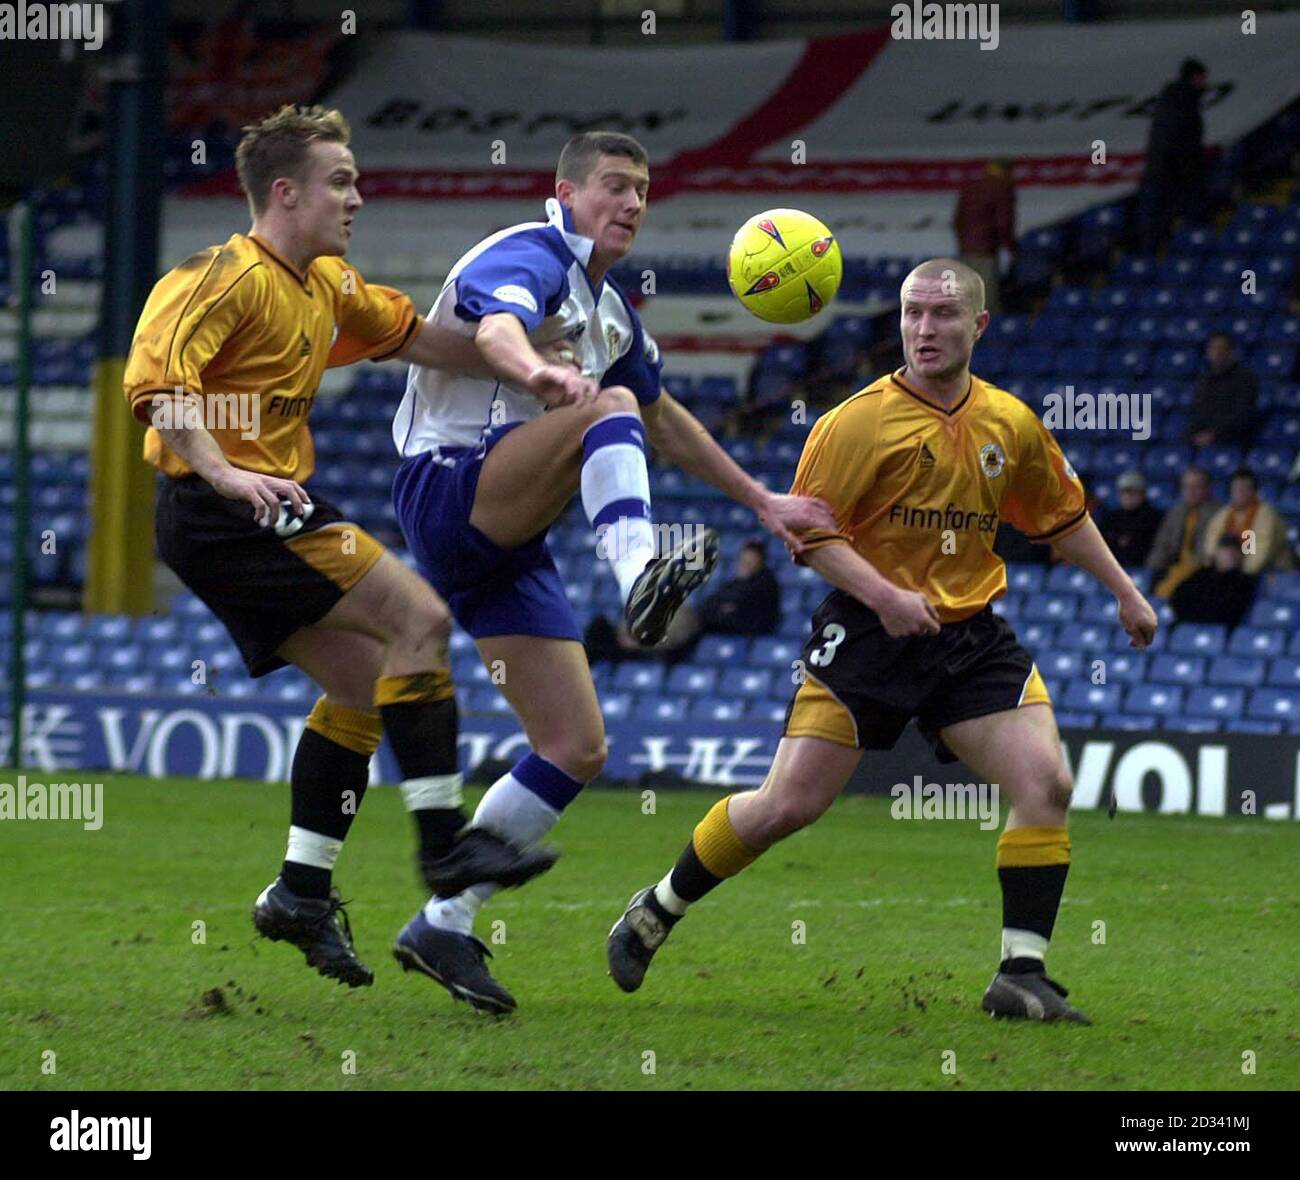 Bury's David Nugent (centre) in action against Boston United's Lee Thompson and Ben Chapman (right) during their Nationwide Division Three match at the Gigg Lane. THIS PICTURE CAN ONLY BE USED WITHIN THE CONTEXT OF AN EDITORIAL FEATURE. NO UNOFFICIAL CLUB WEBSITE USE. Stock Photo